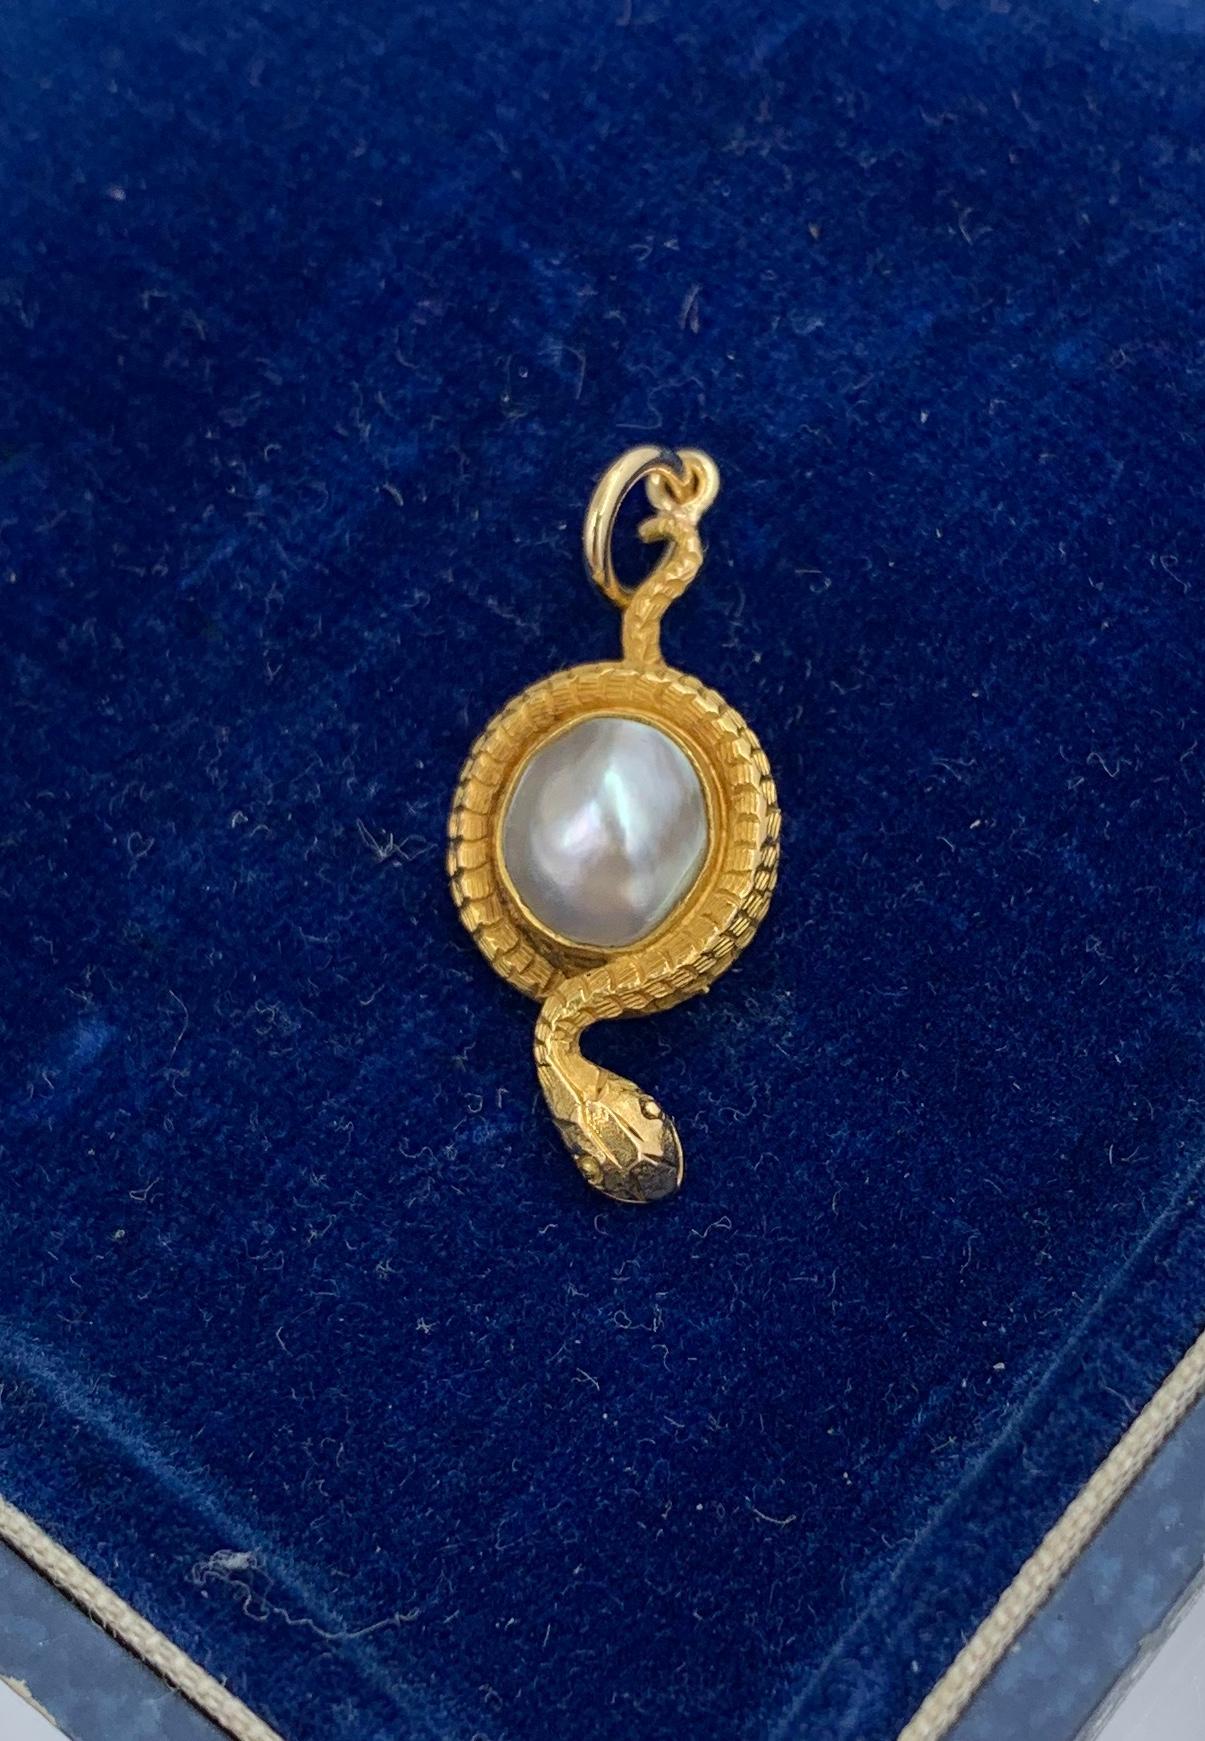 This is a rare antique Victorian Snake Pendant Necklace depicting a snake or serpent wrapped around an egg or globe.  The snake is beautifully created in 14 Karat yellow gold.  The egg or globe is a gorgeous Baroque Pearl of a stunning silver color.